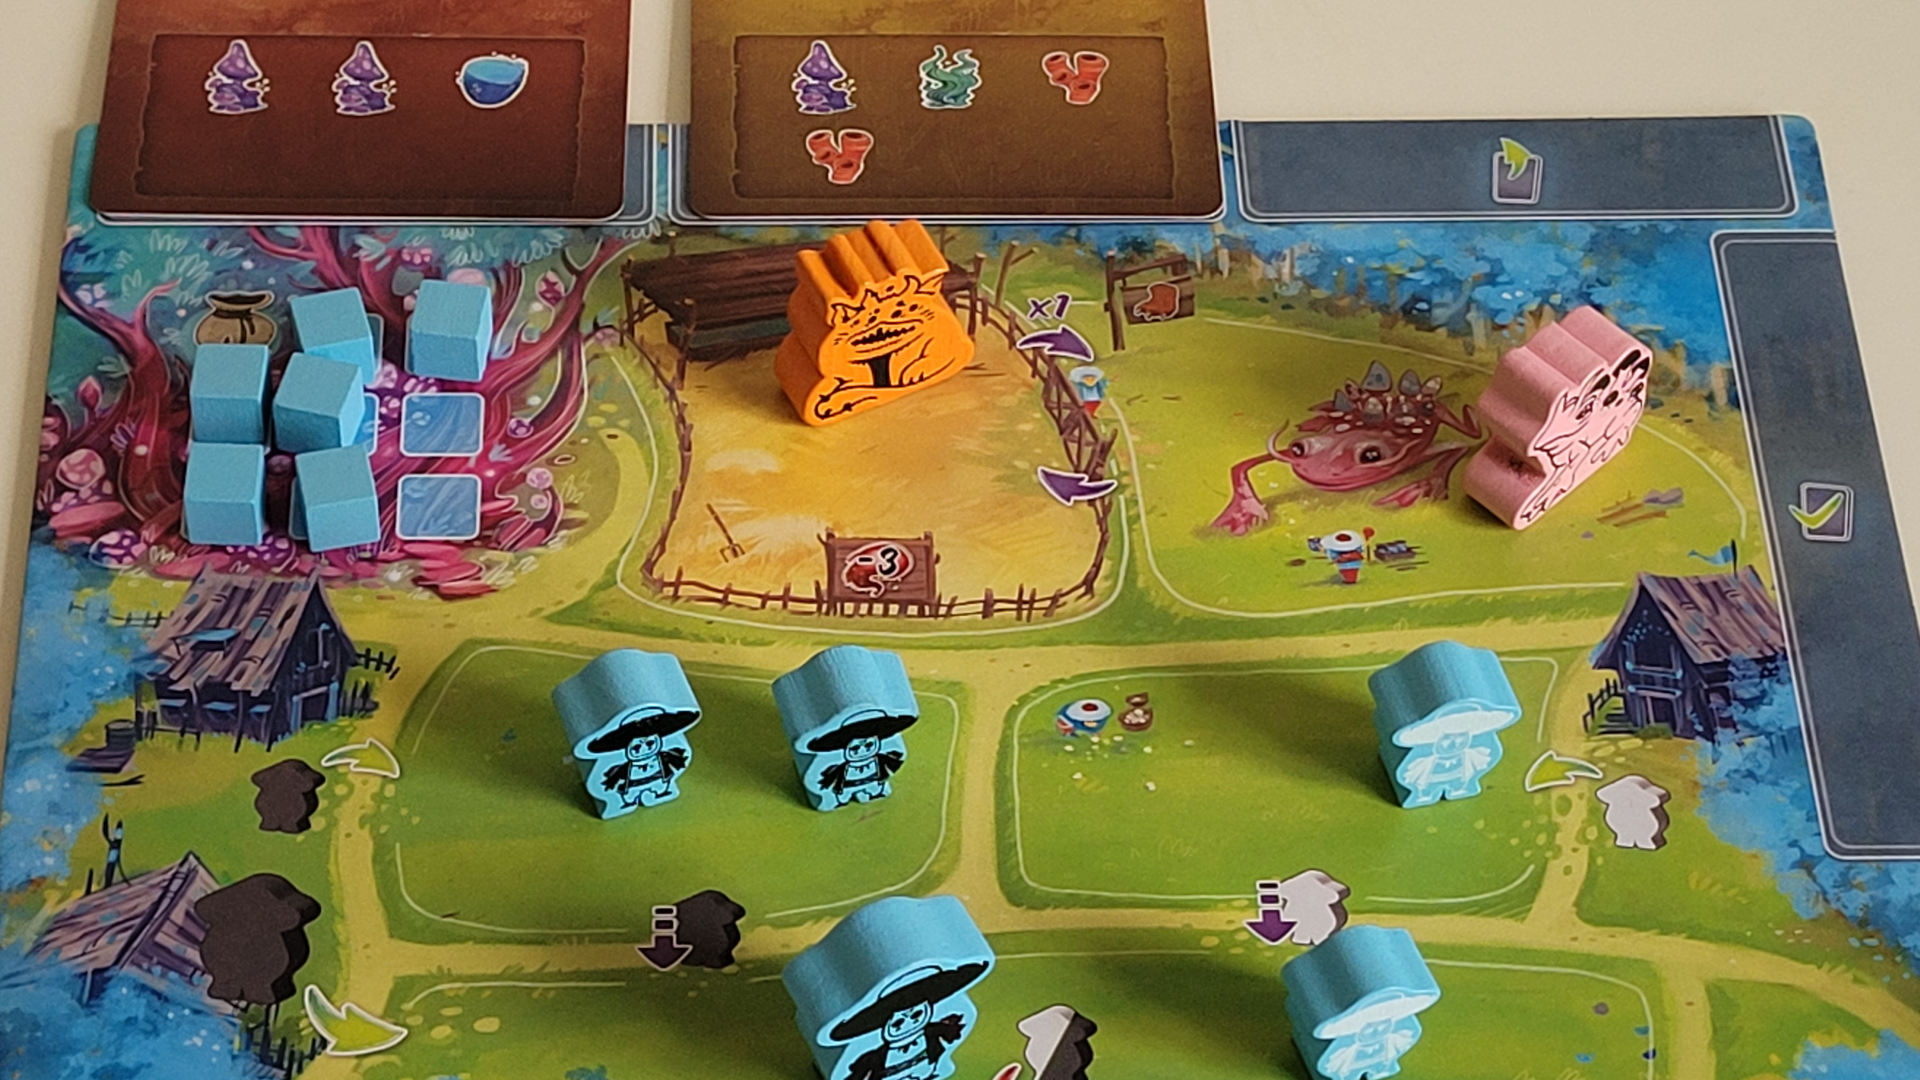 Wooden meeples scattered across the Arborea board